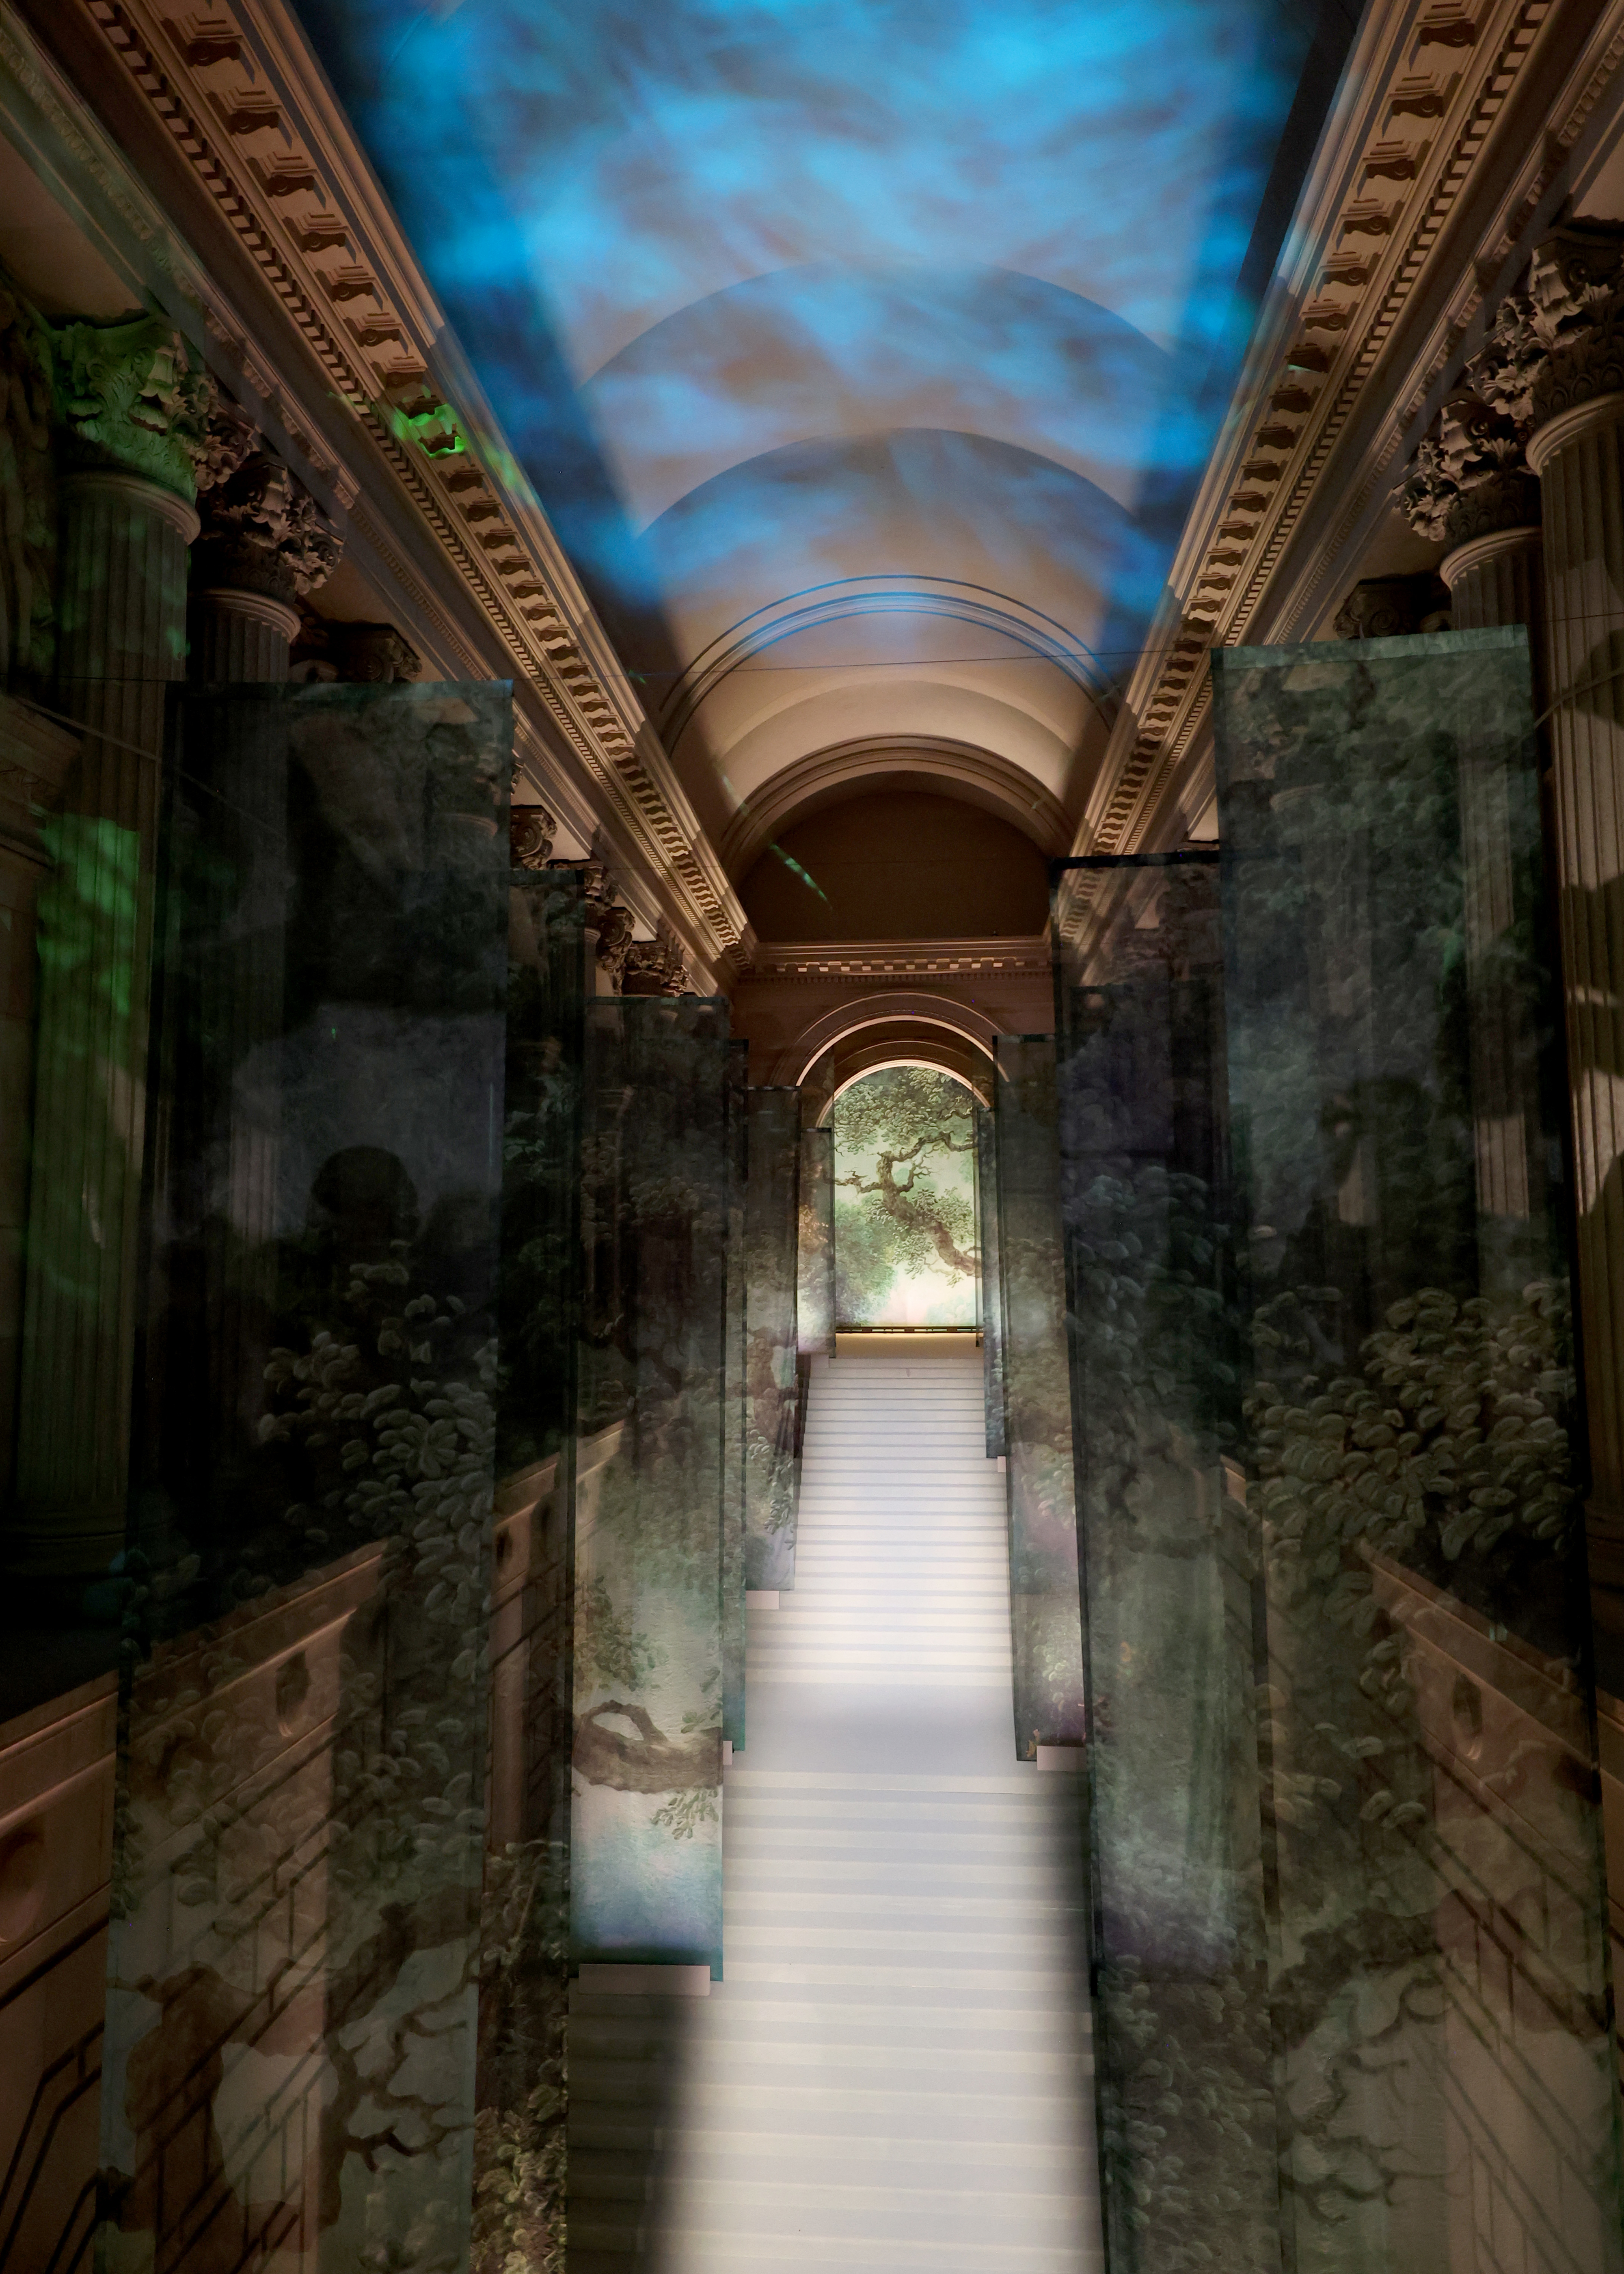 A long staircase The Met Museum building with a dynamic light installation creating an ethereal atmosphere